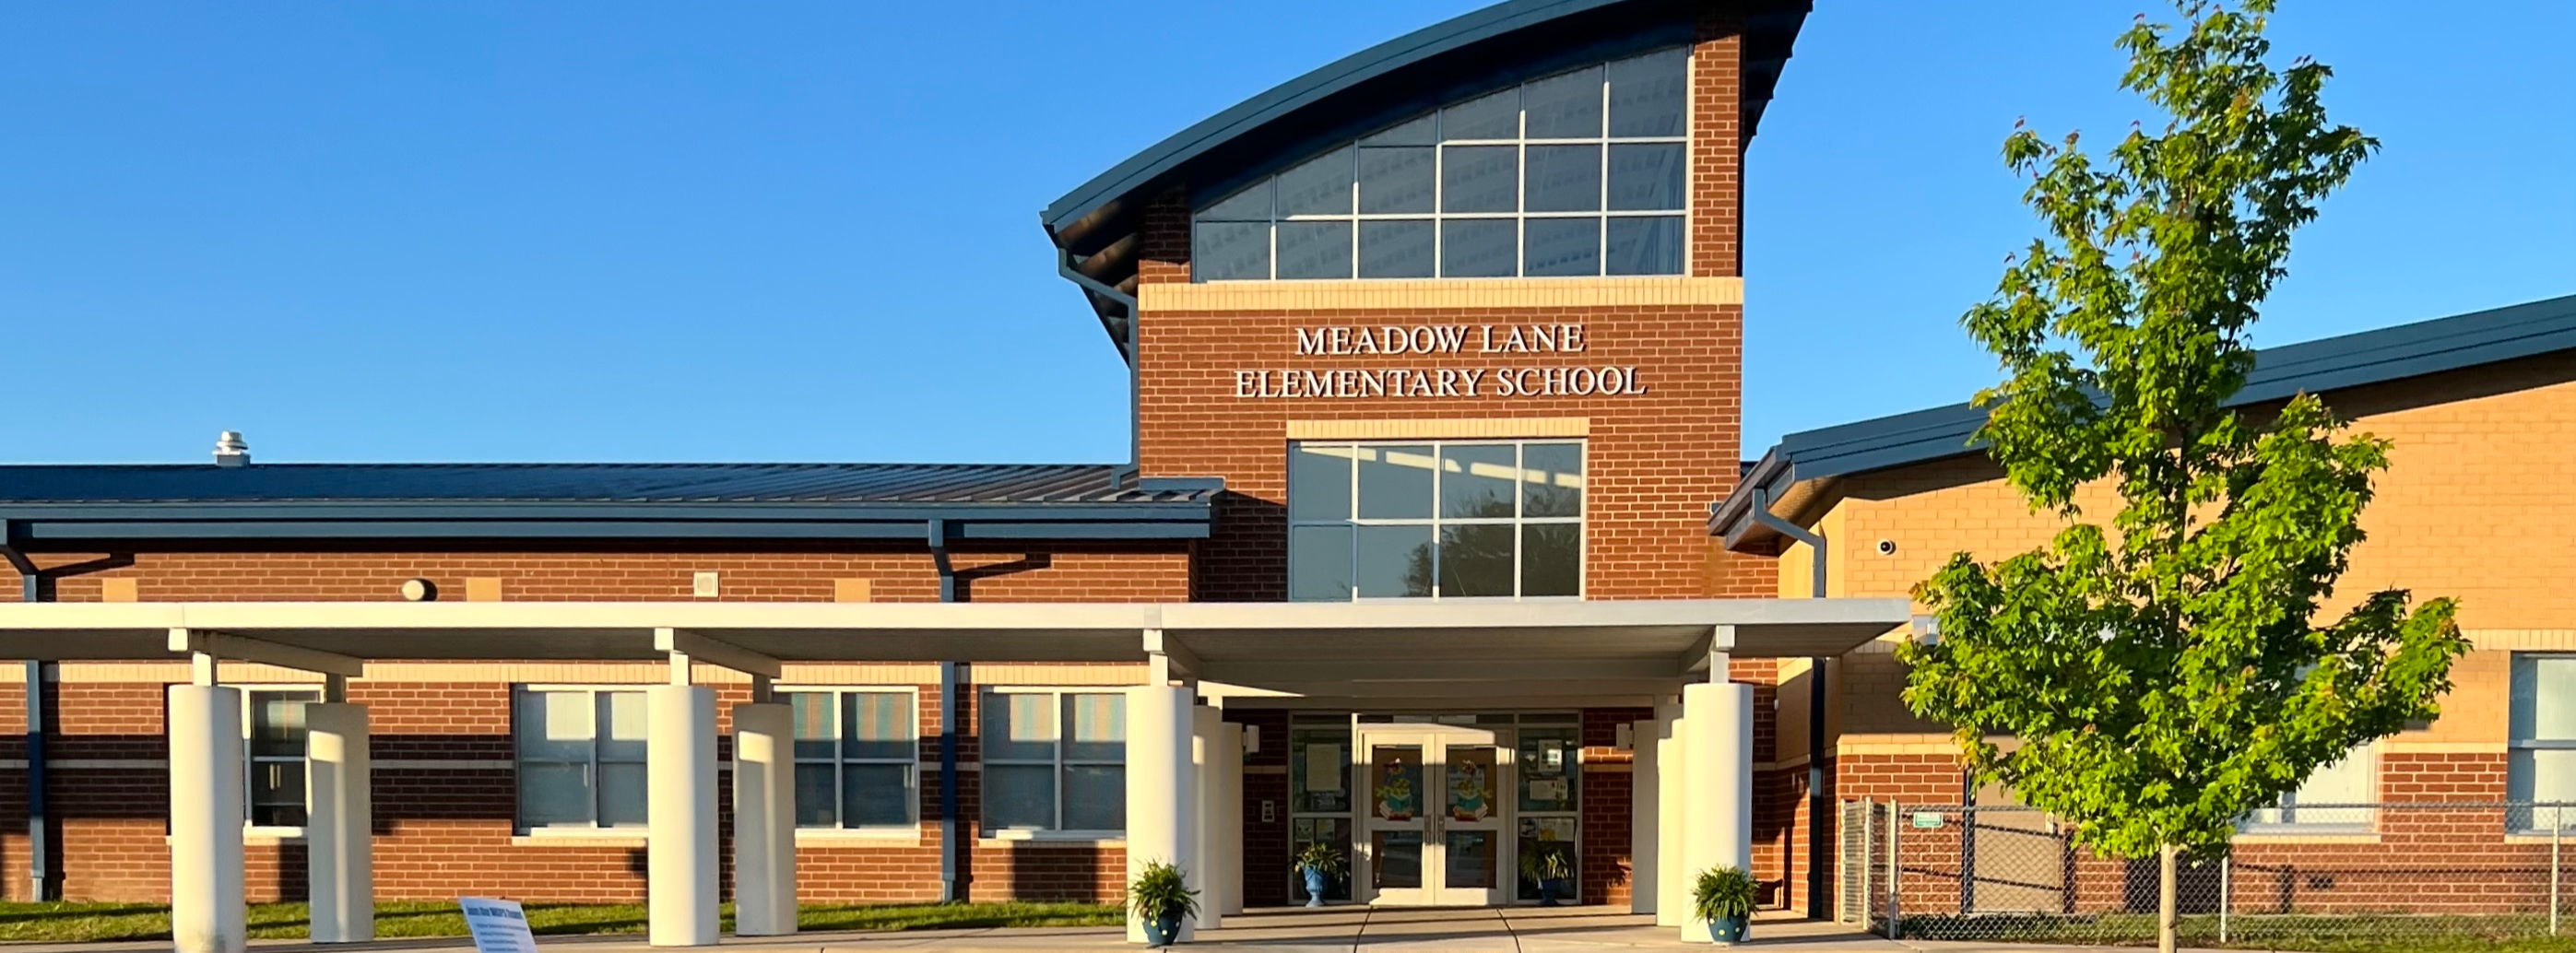 front entrance to meadow lane elementary